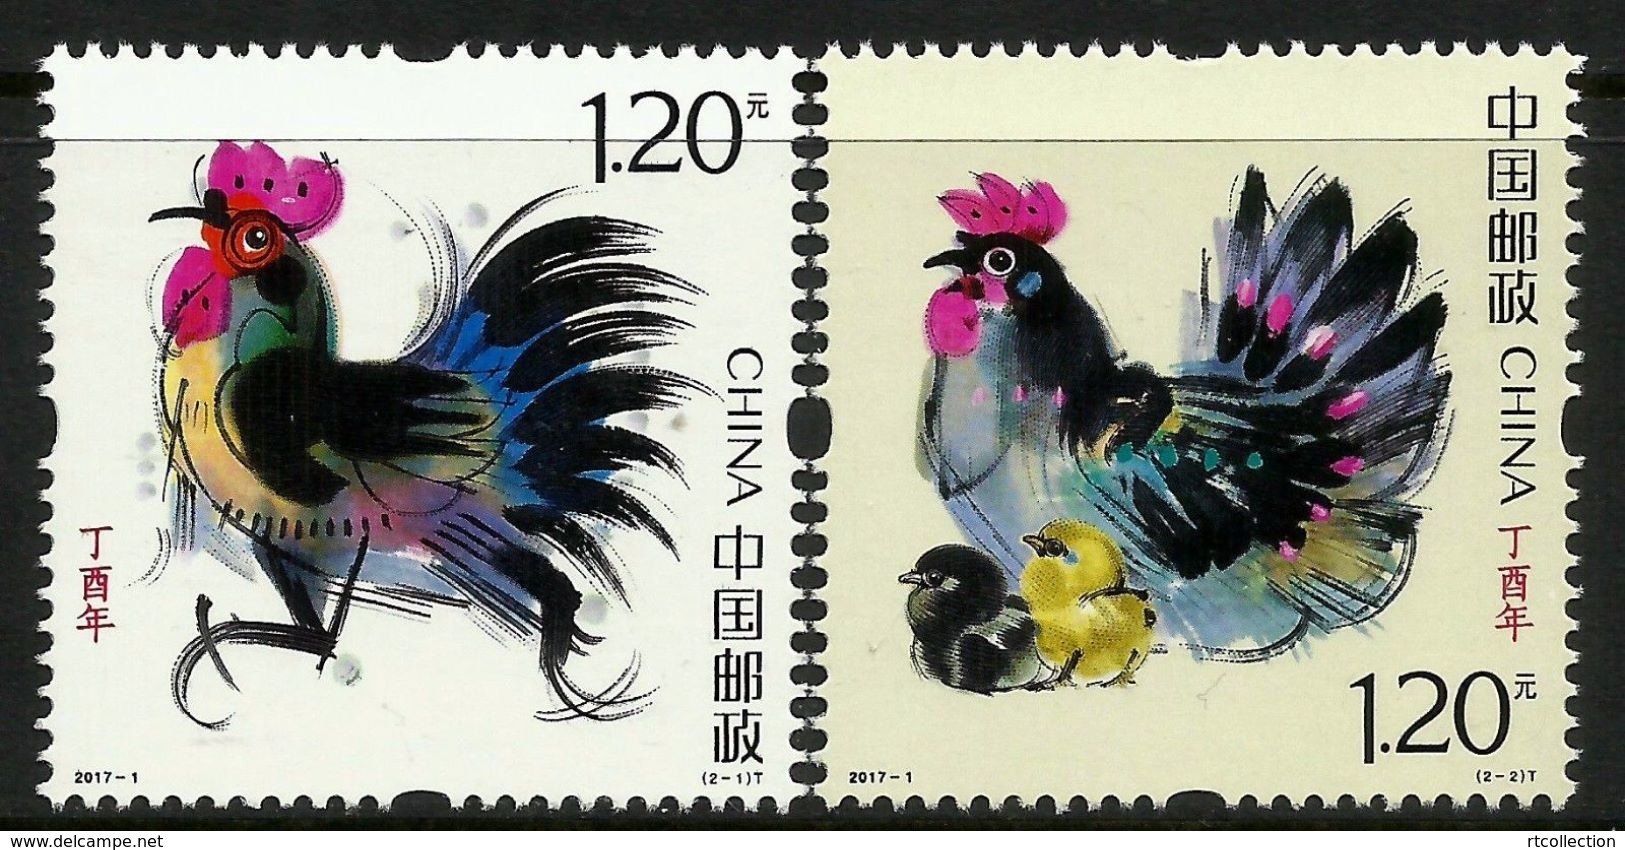 China 2017 - A Set Of 2 Chinese Lunar New Year Of Rooster Zodiac Animals Cultures Celebrations Stamps MNH 2017-1 - Farm